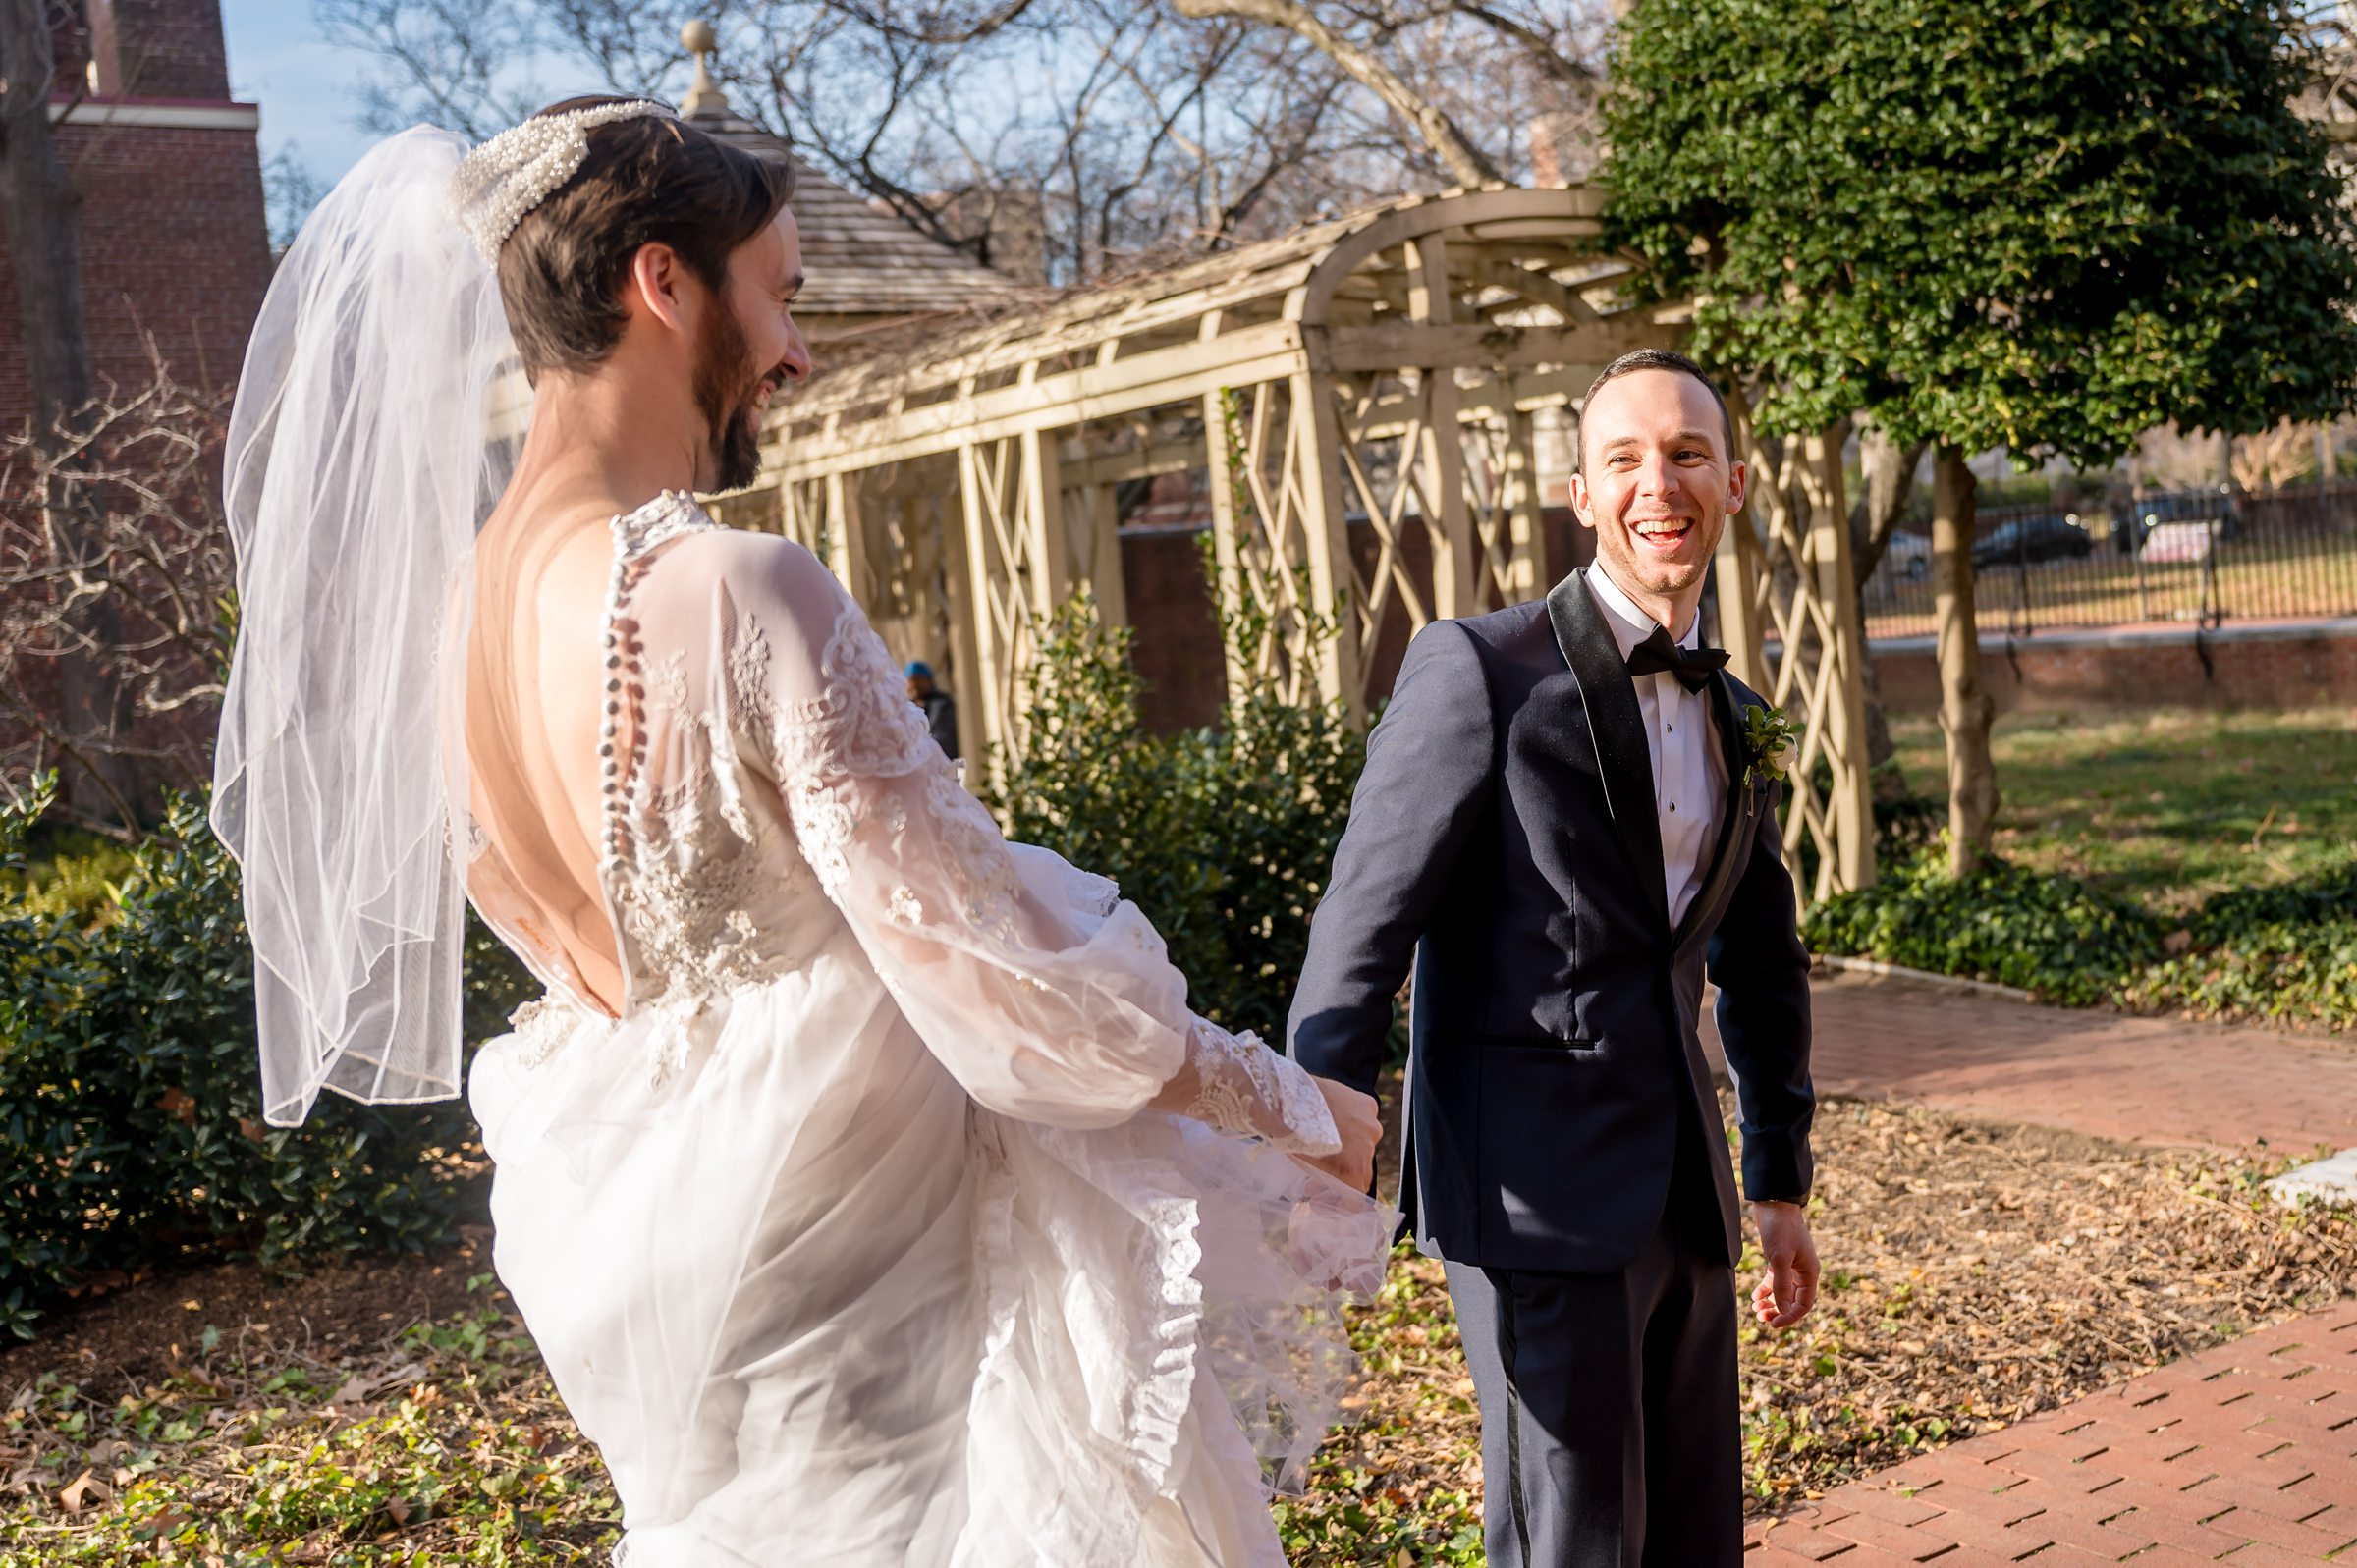 A bride and groom strolling down a brick walkway during their Lilah Events wedding.